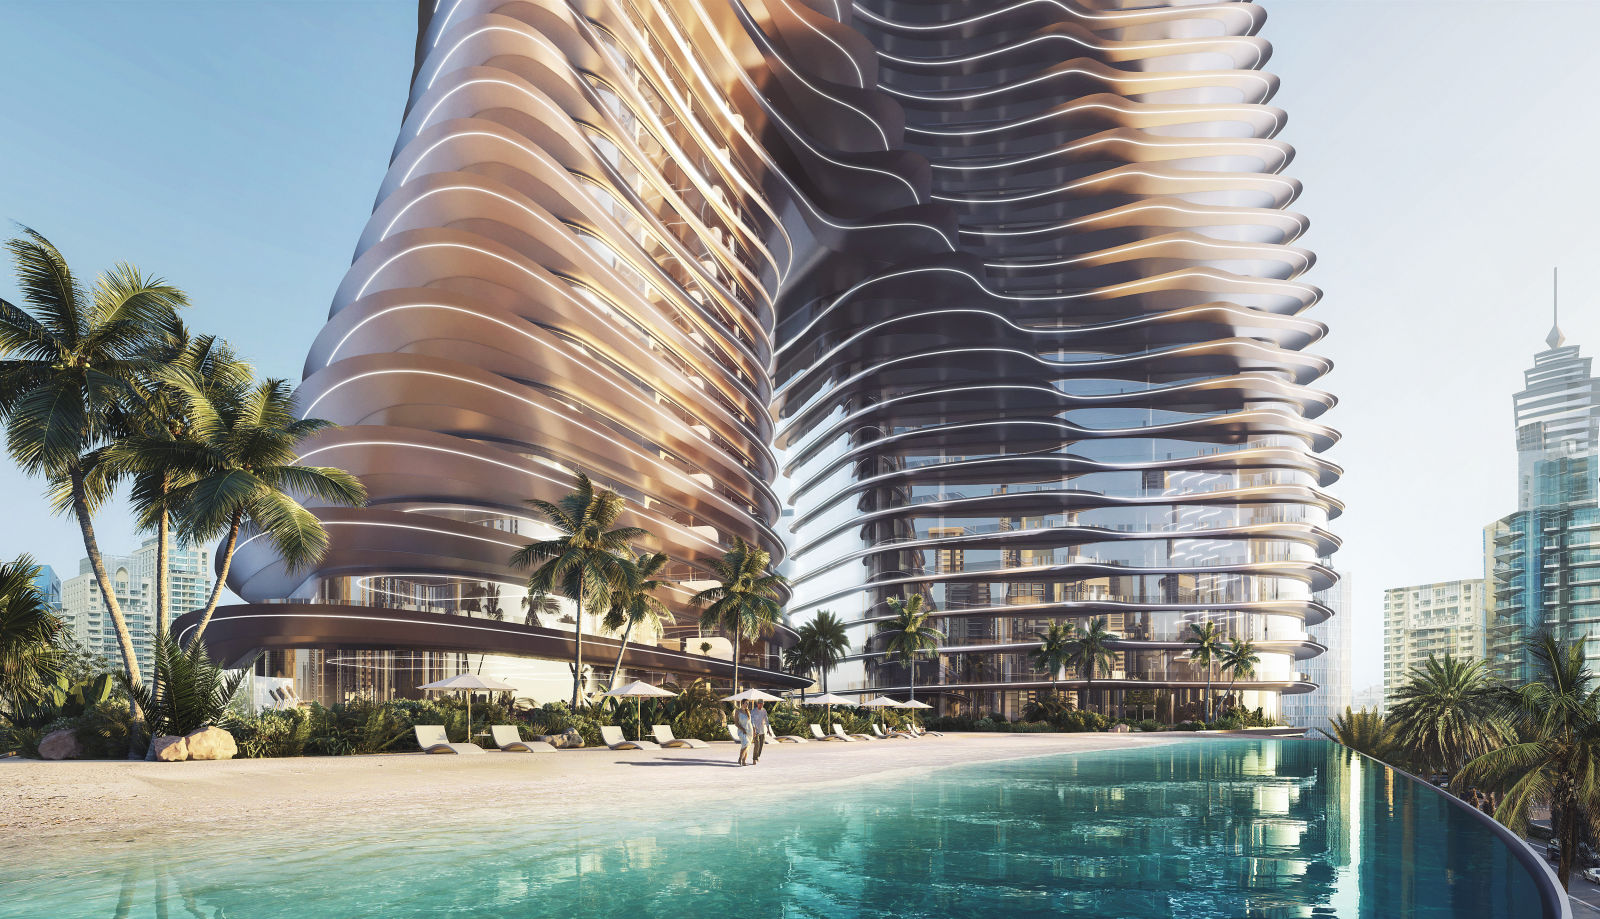 first-ever Bugatti Residences in the world